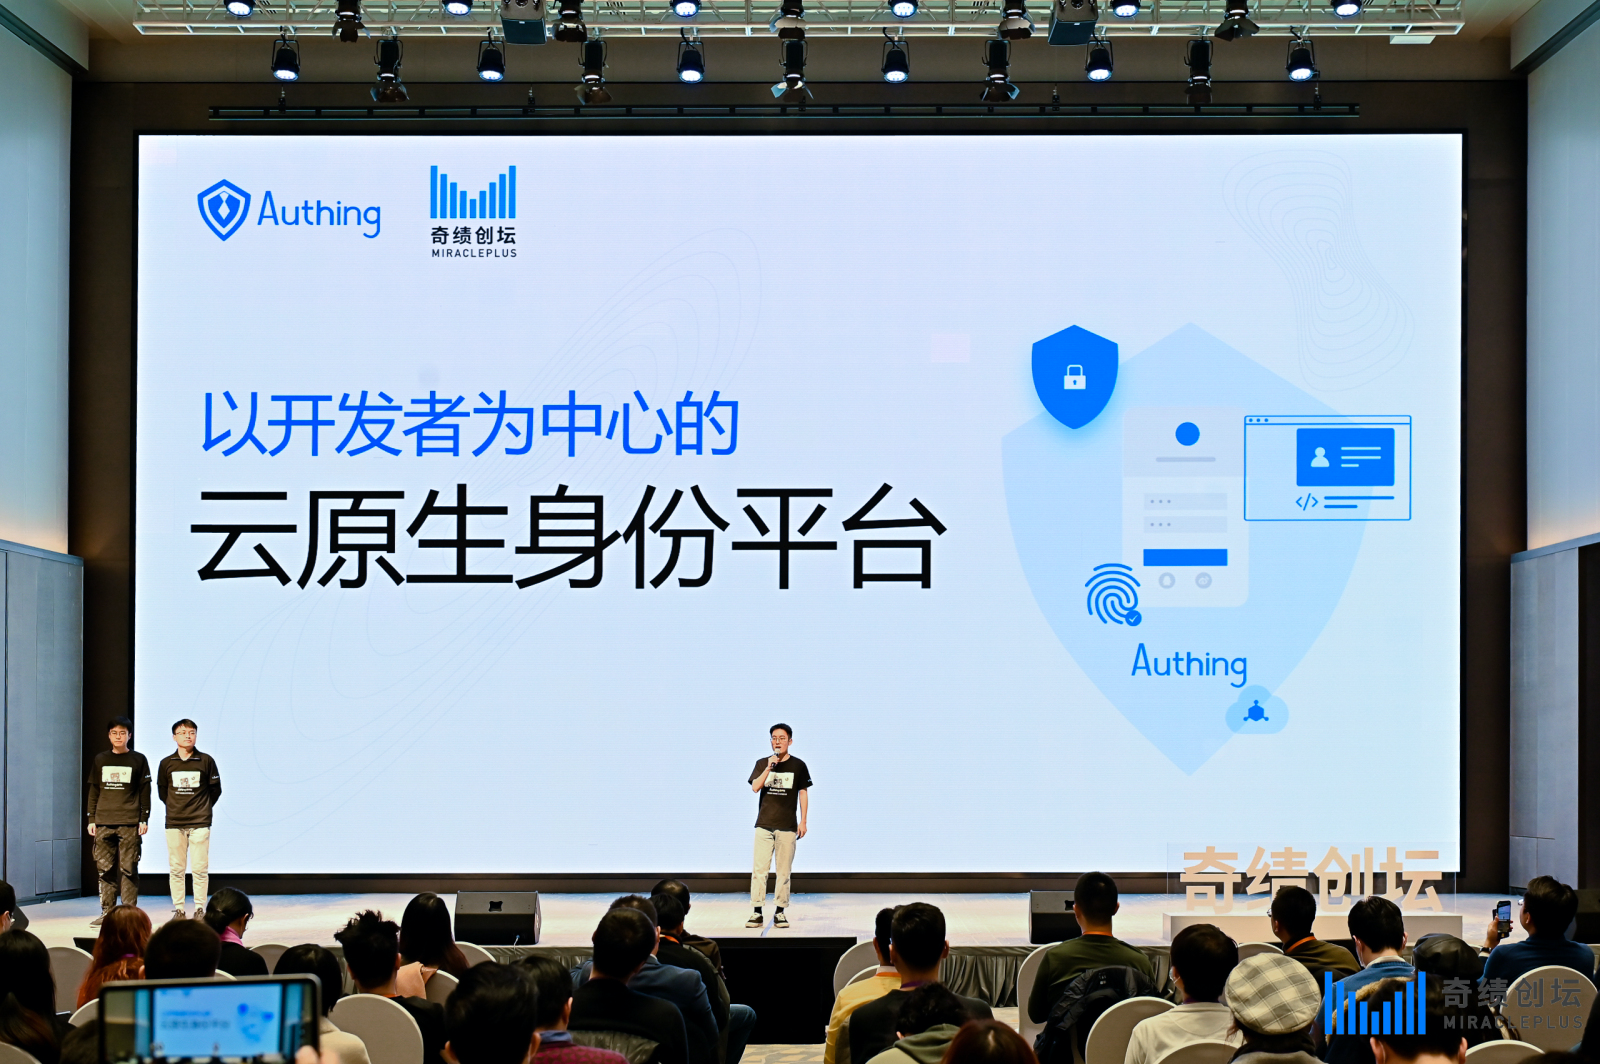 Authing CEO 谢扬在大会上介绍 Authing